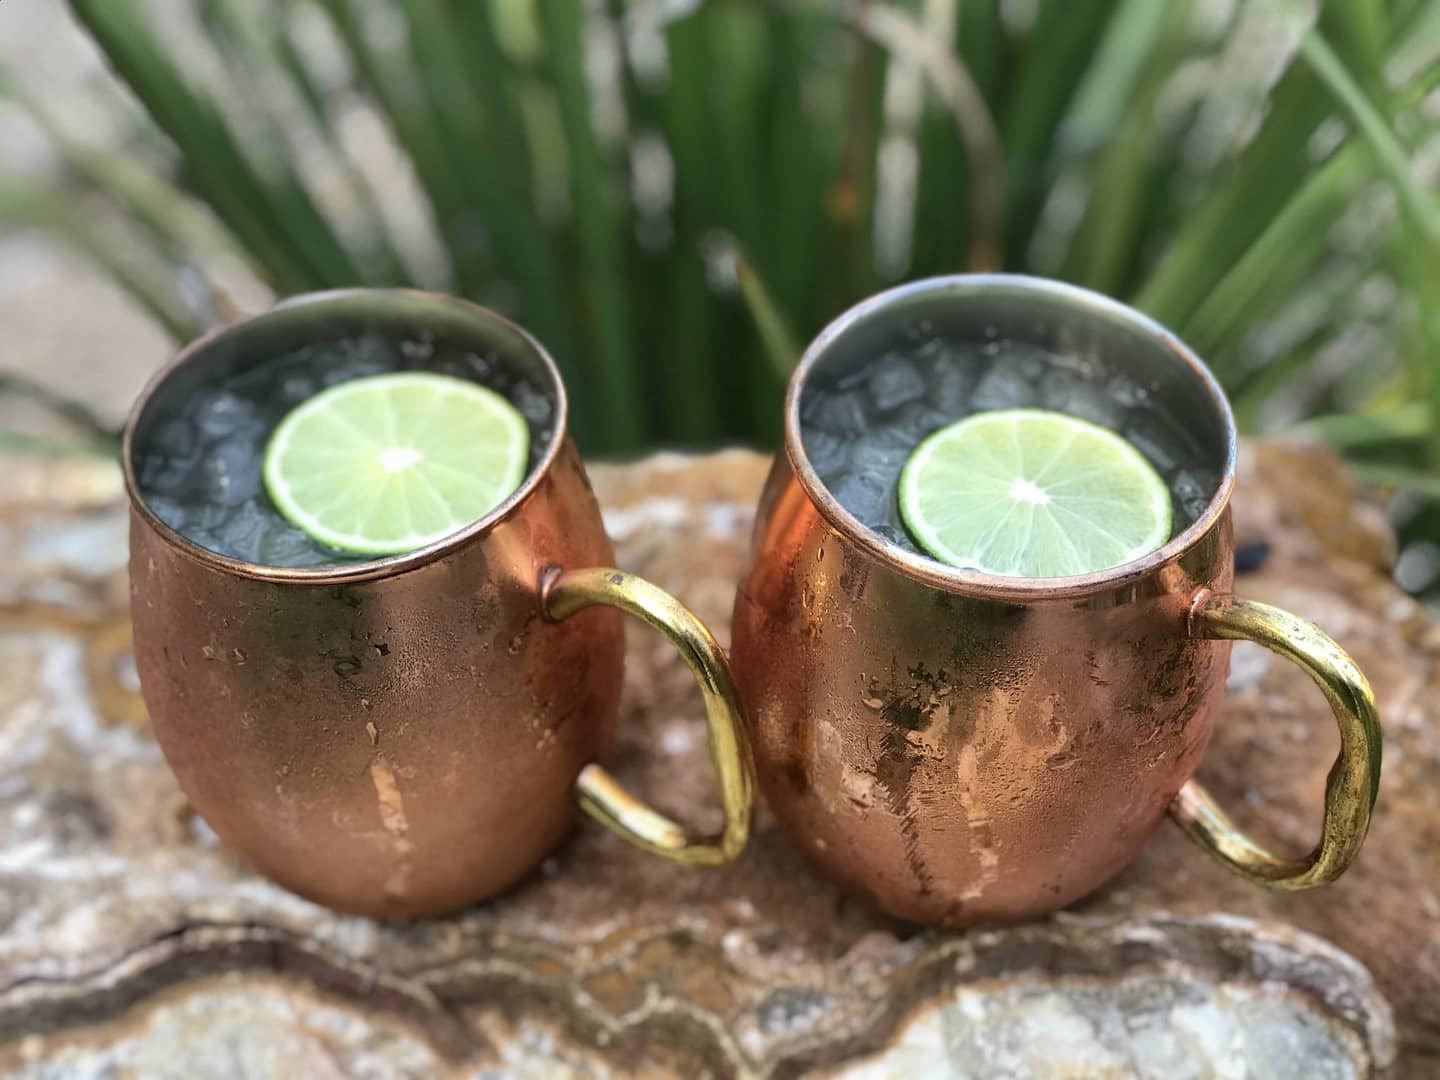 Moscow Mules made with Devils River Whiskey